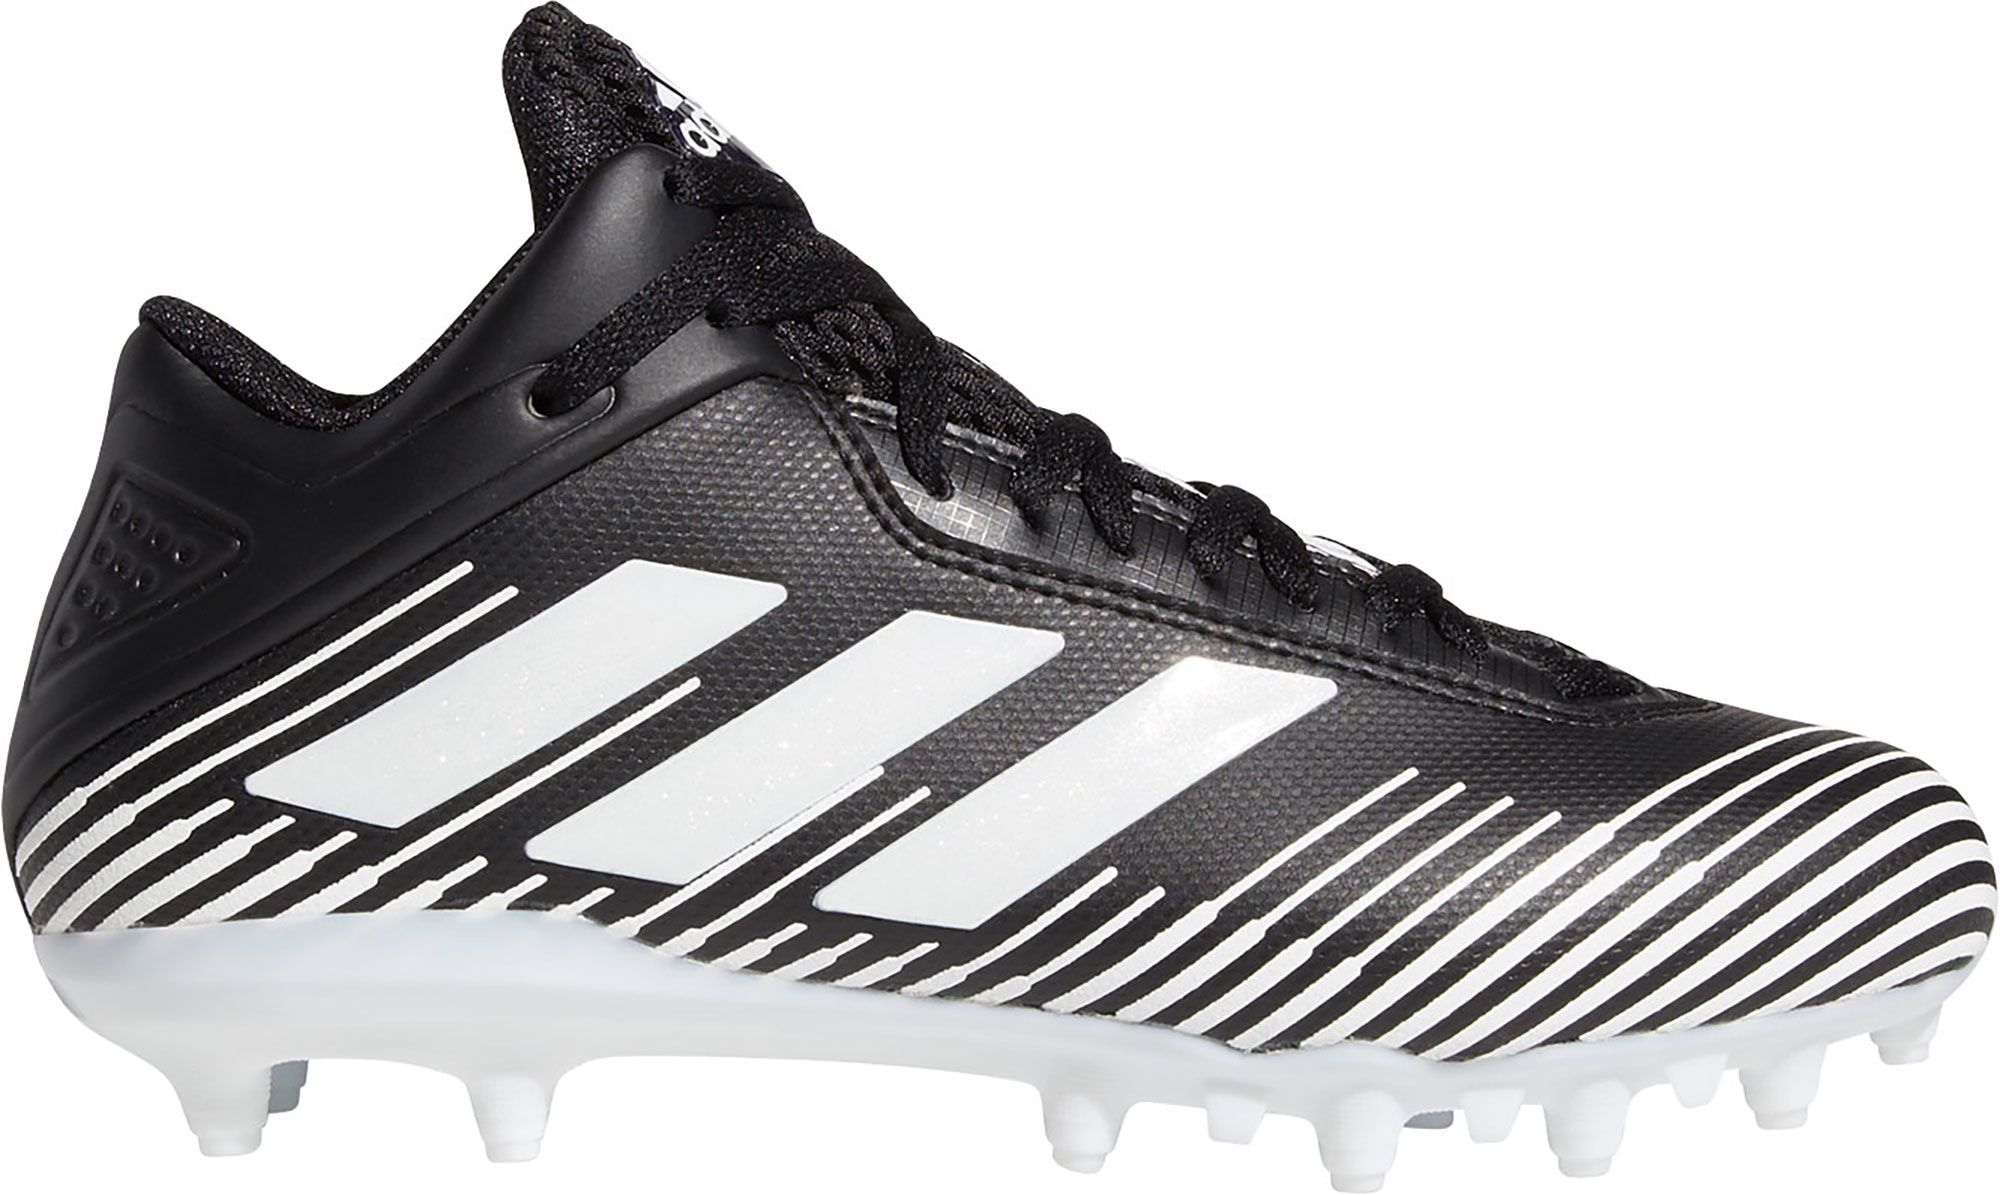 nike ghost cleats